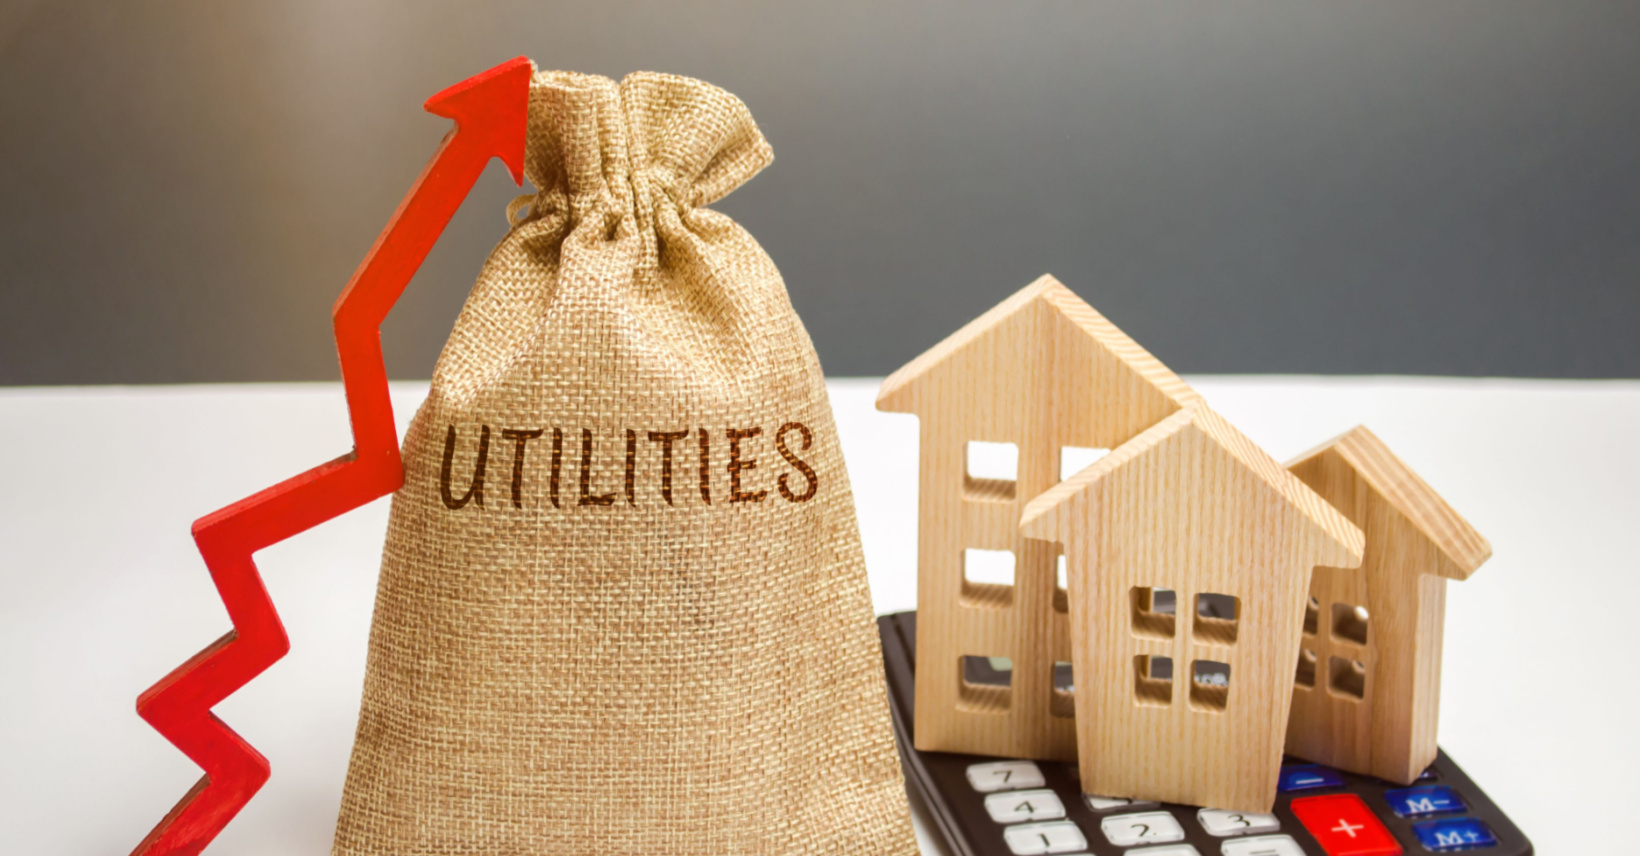 How to Save Money on Utilities